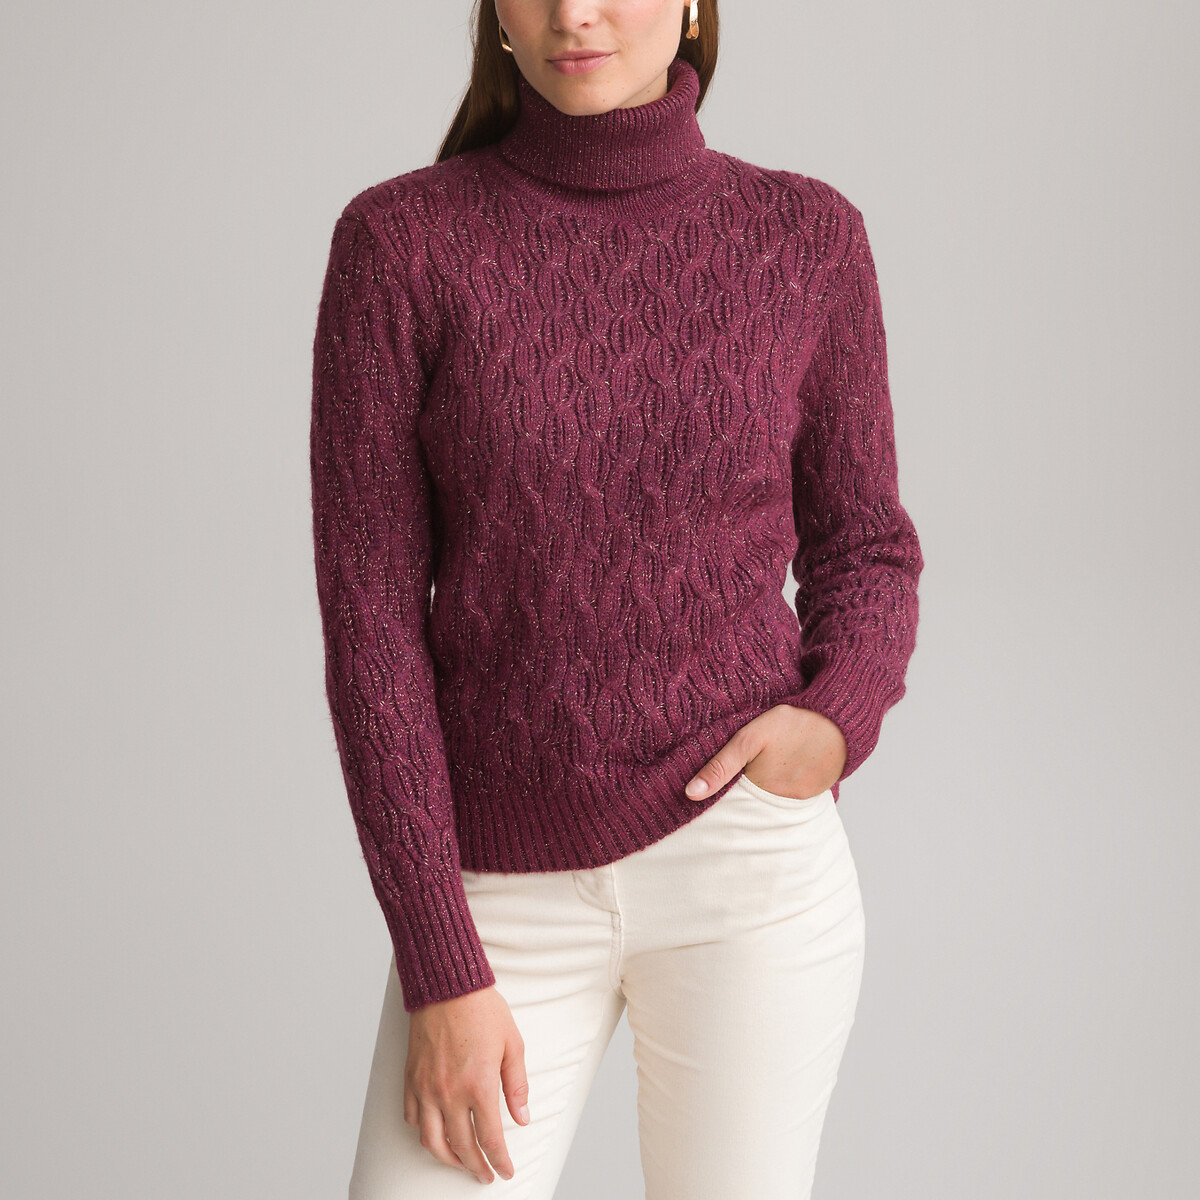 Recycled Turtleneck Jumper in Chunky Knit